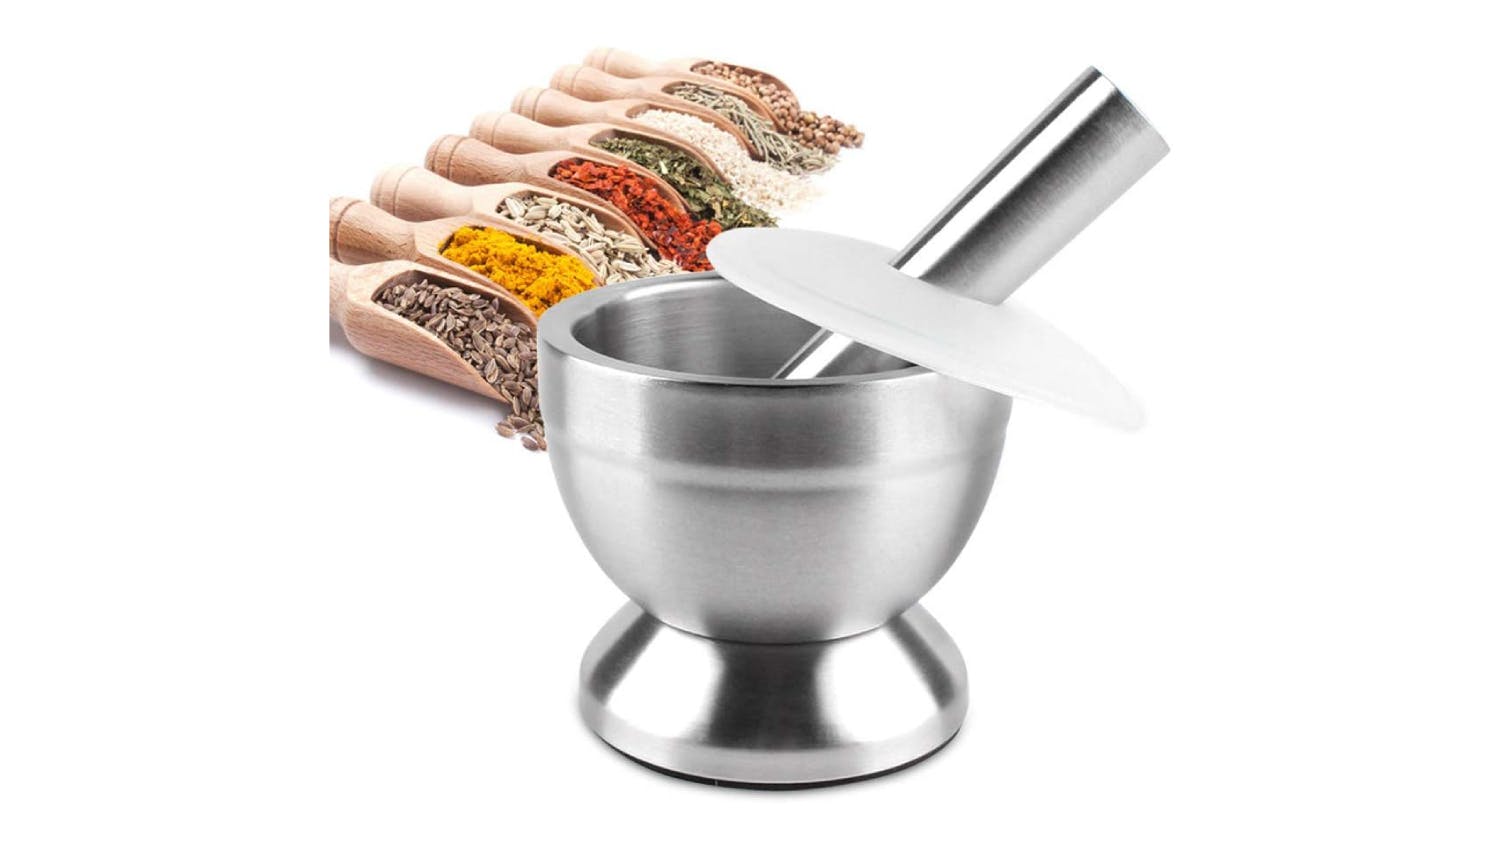 Kmall Stainless Steel Mortar and Pestle with Cover